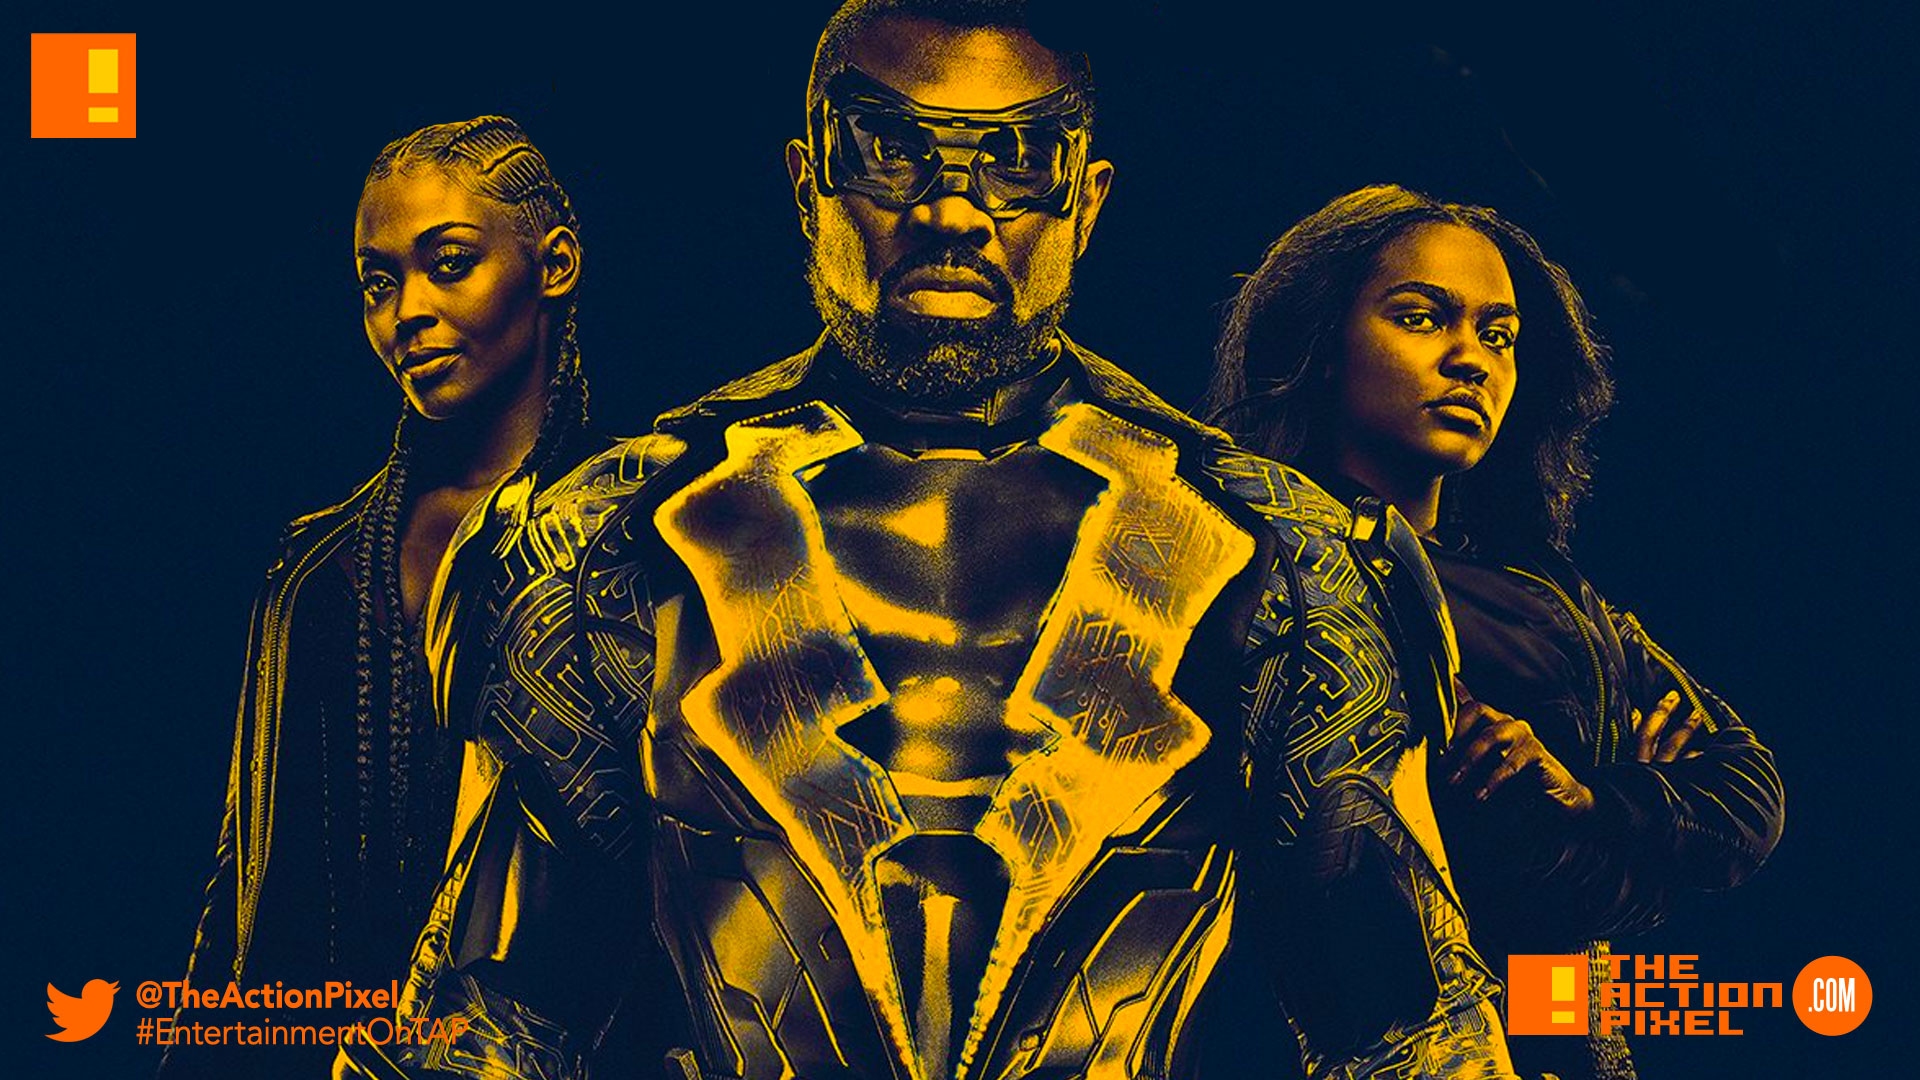 black lightning, DC comics, the action pixel, entertainment on tap, cress williams, cw,the cw, the cw network, warner bros. dc comics, dc entertainment, jefferson pierce, first look,